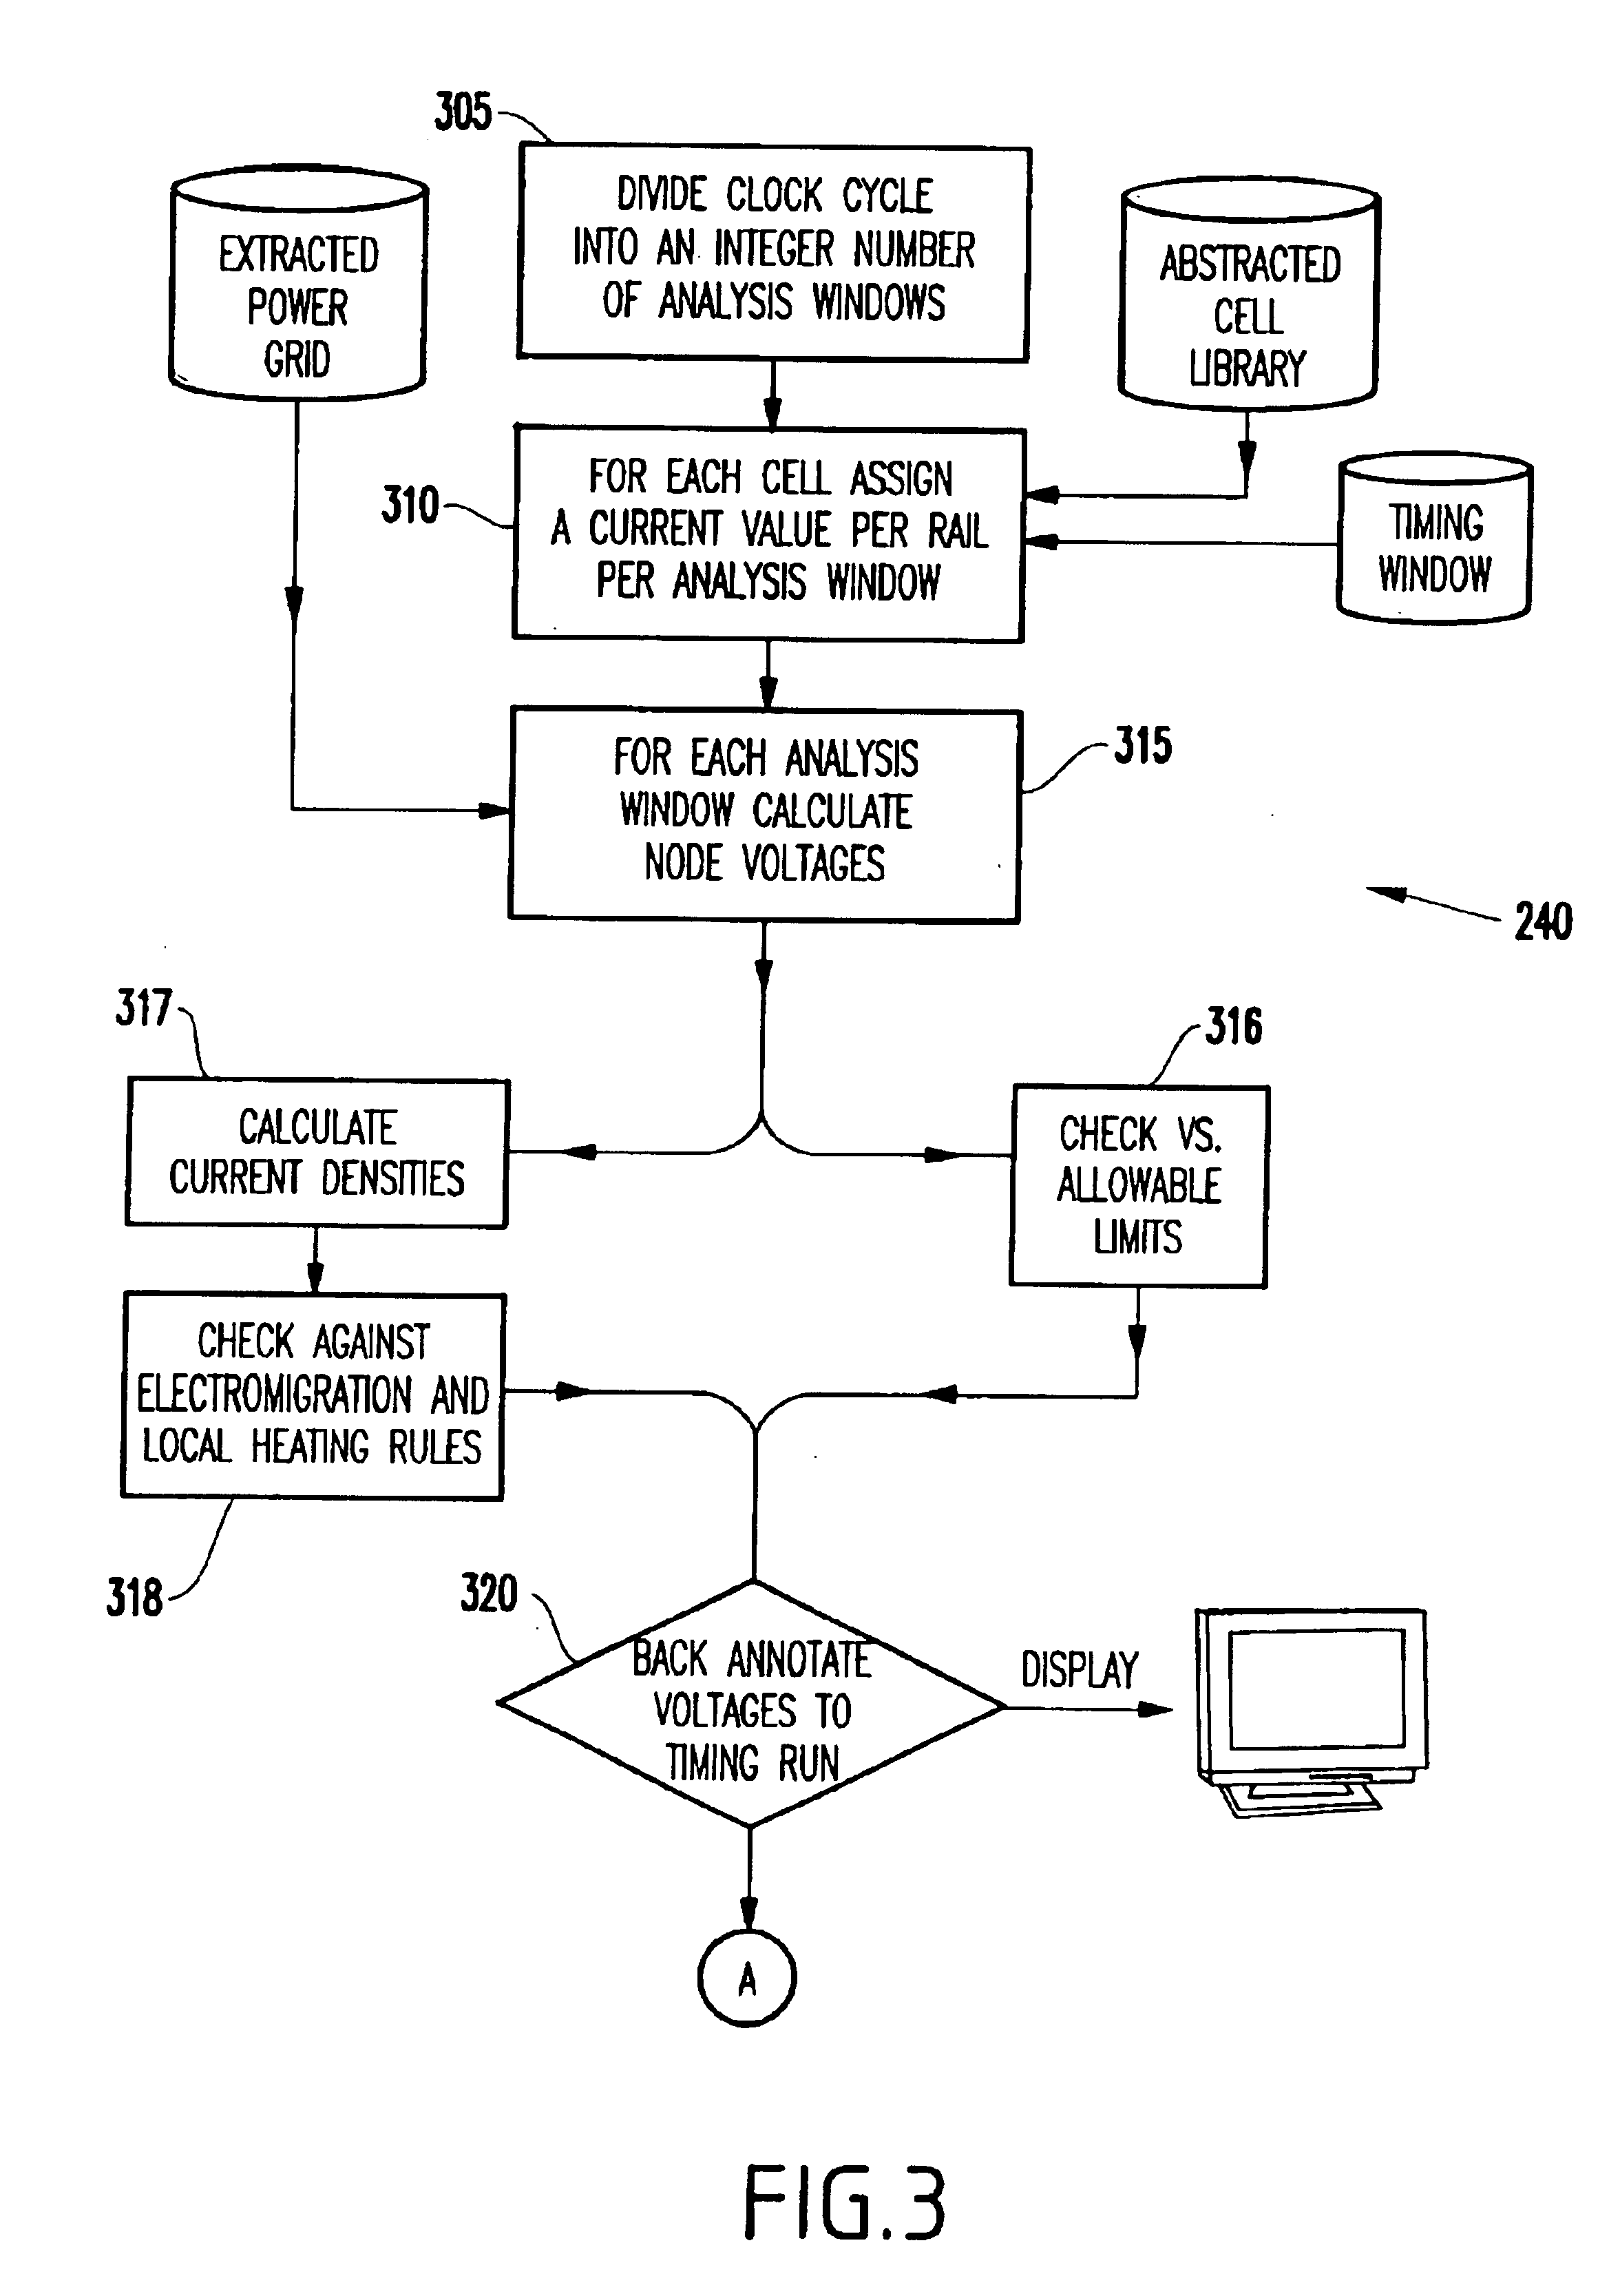 System and method for analyzing power distribution using static timing analysis